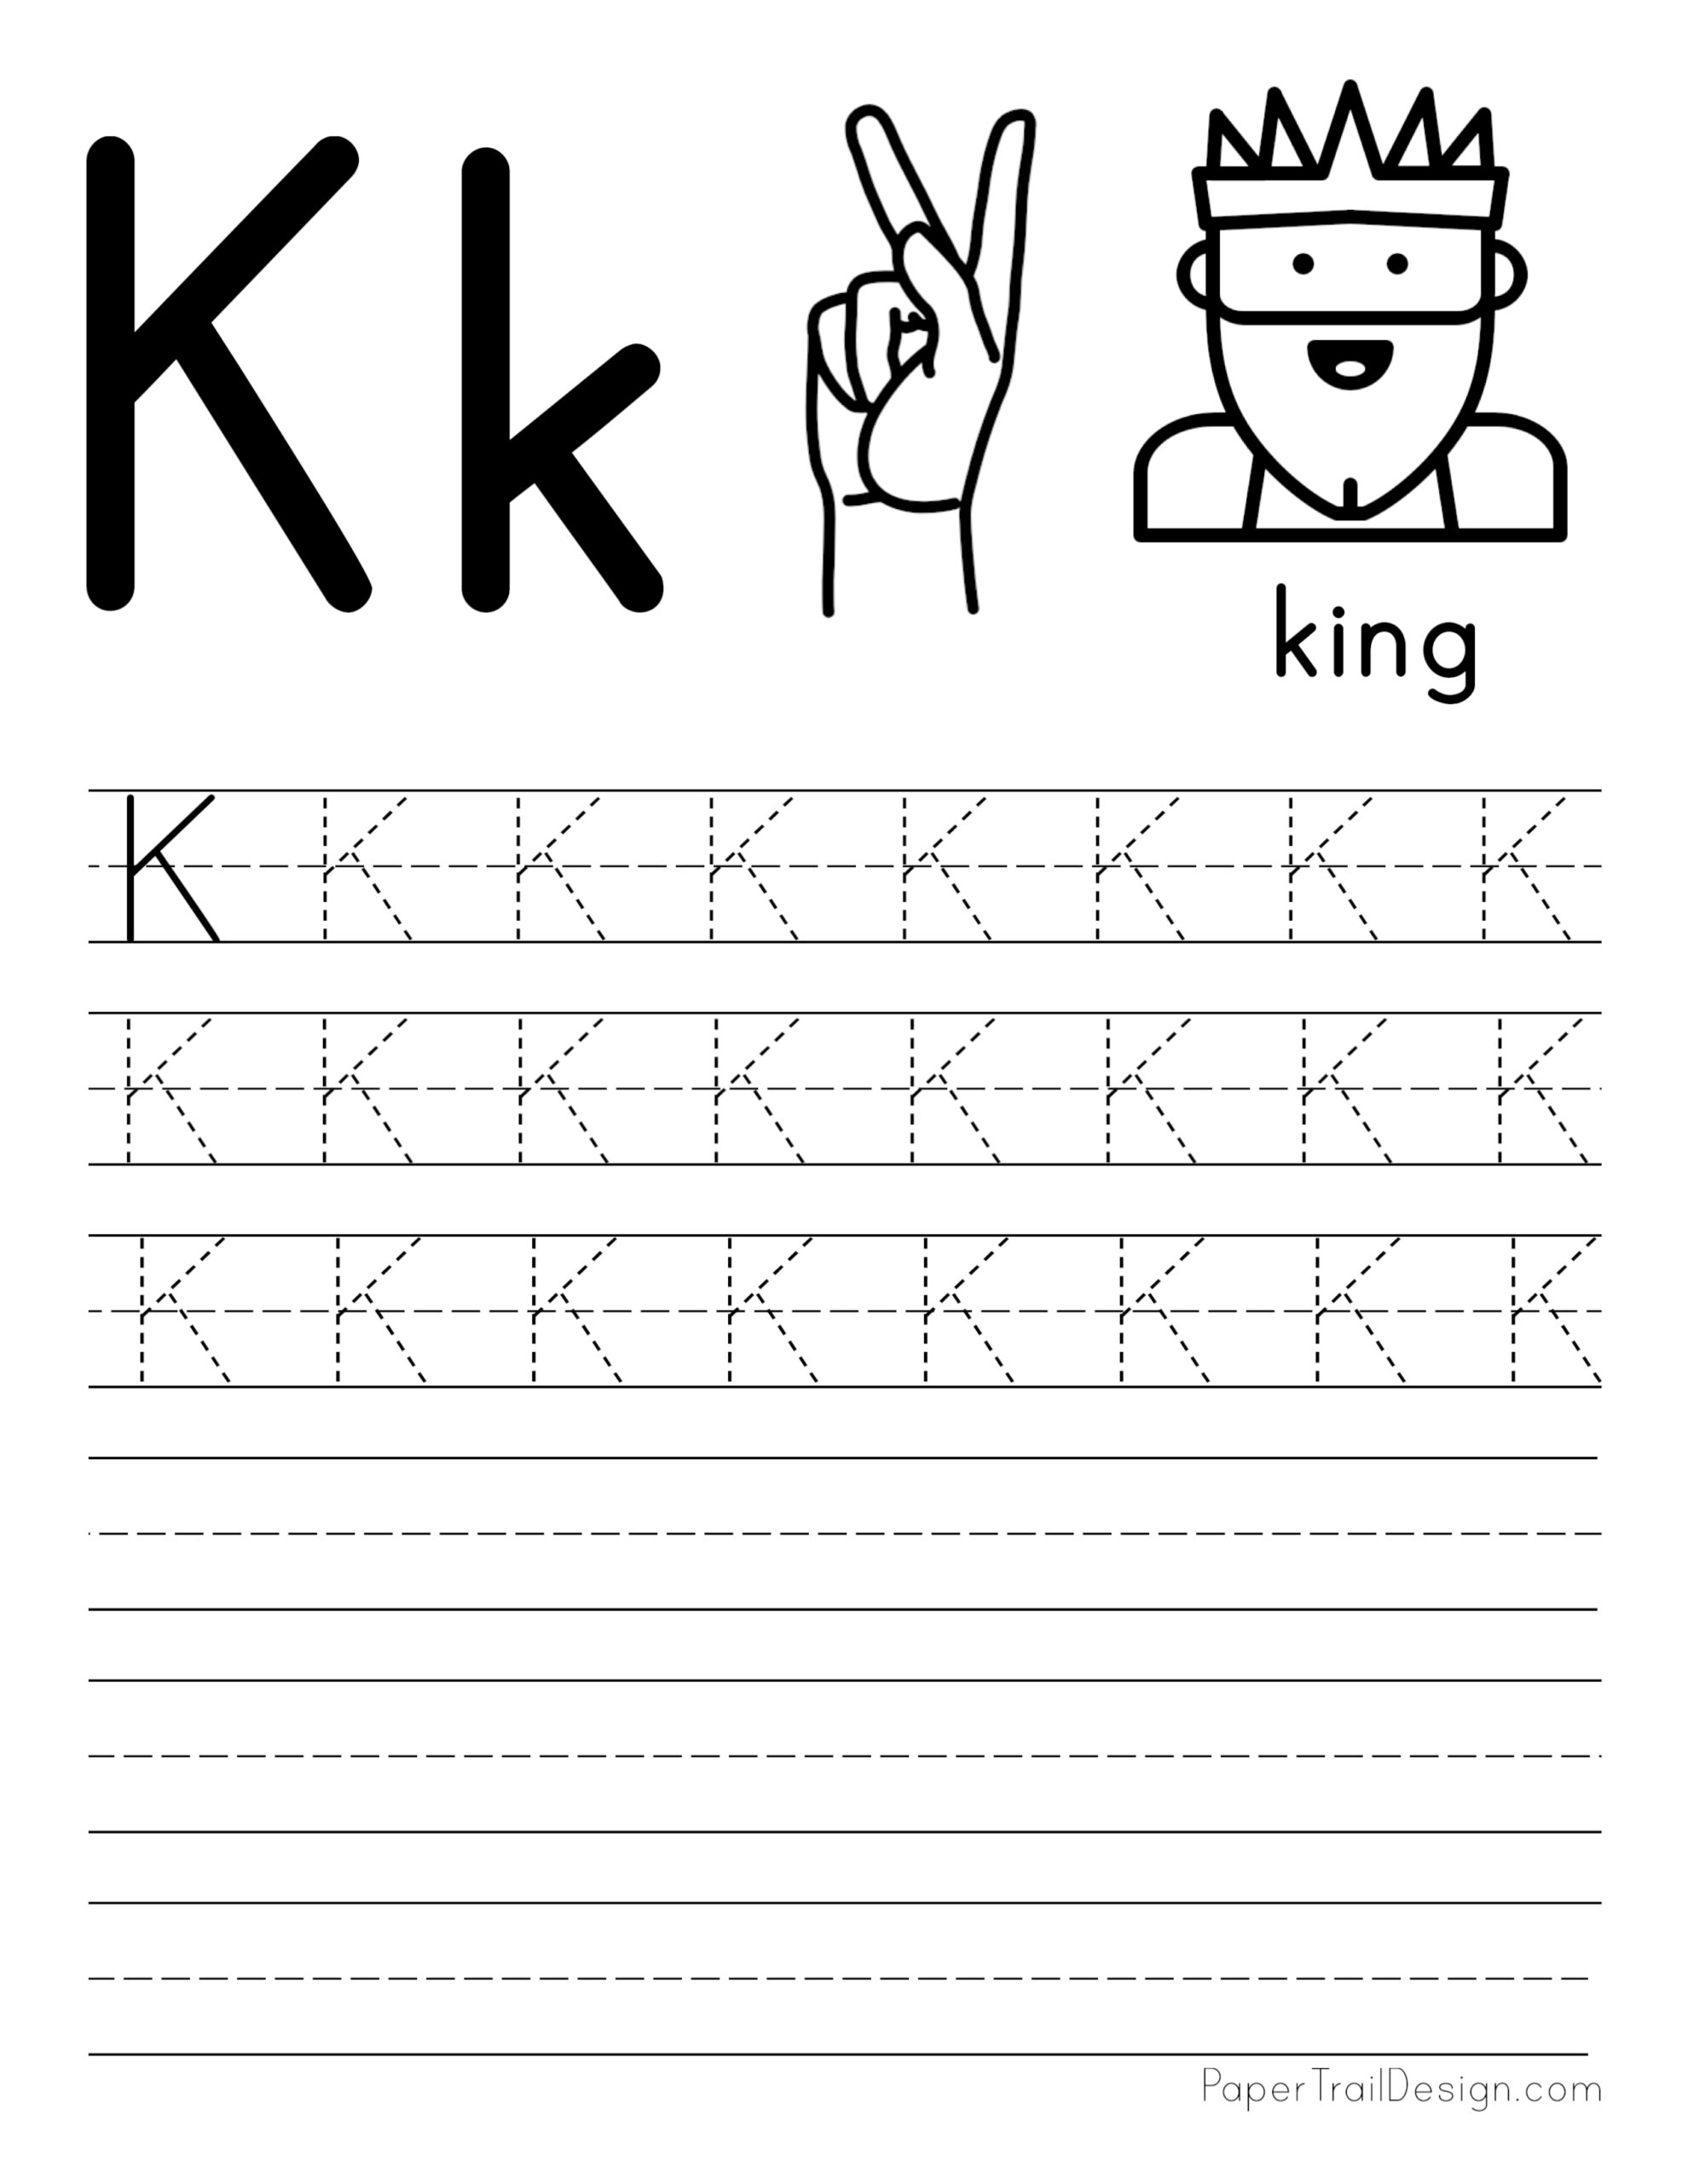 Lowercase Letter K Tracing Sheet Printable Form Templates and Letter